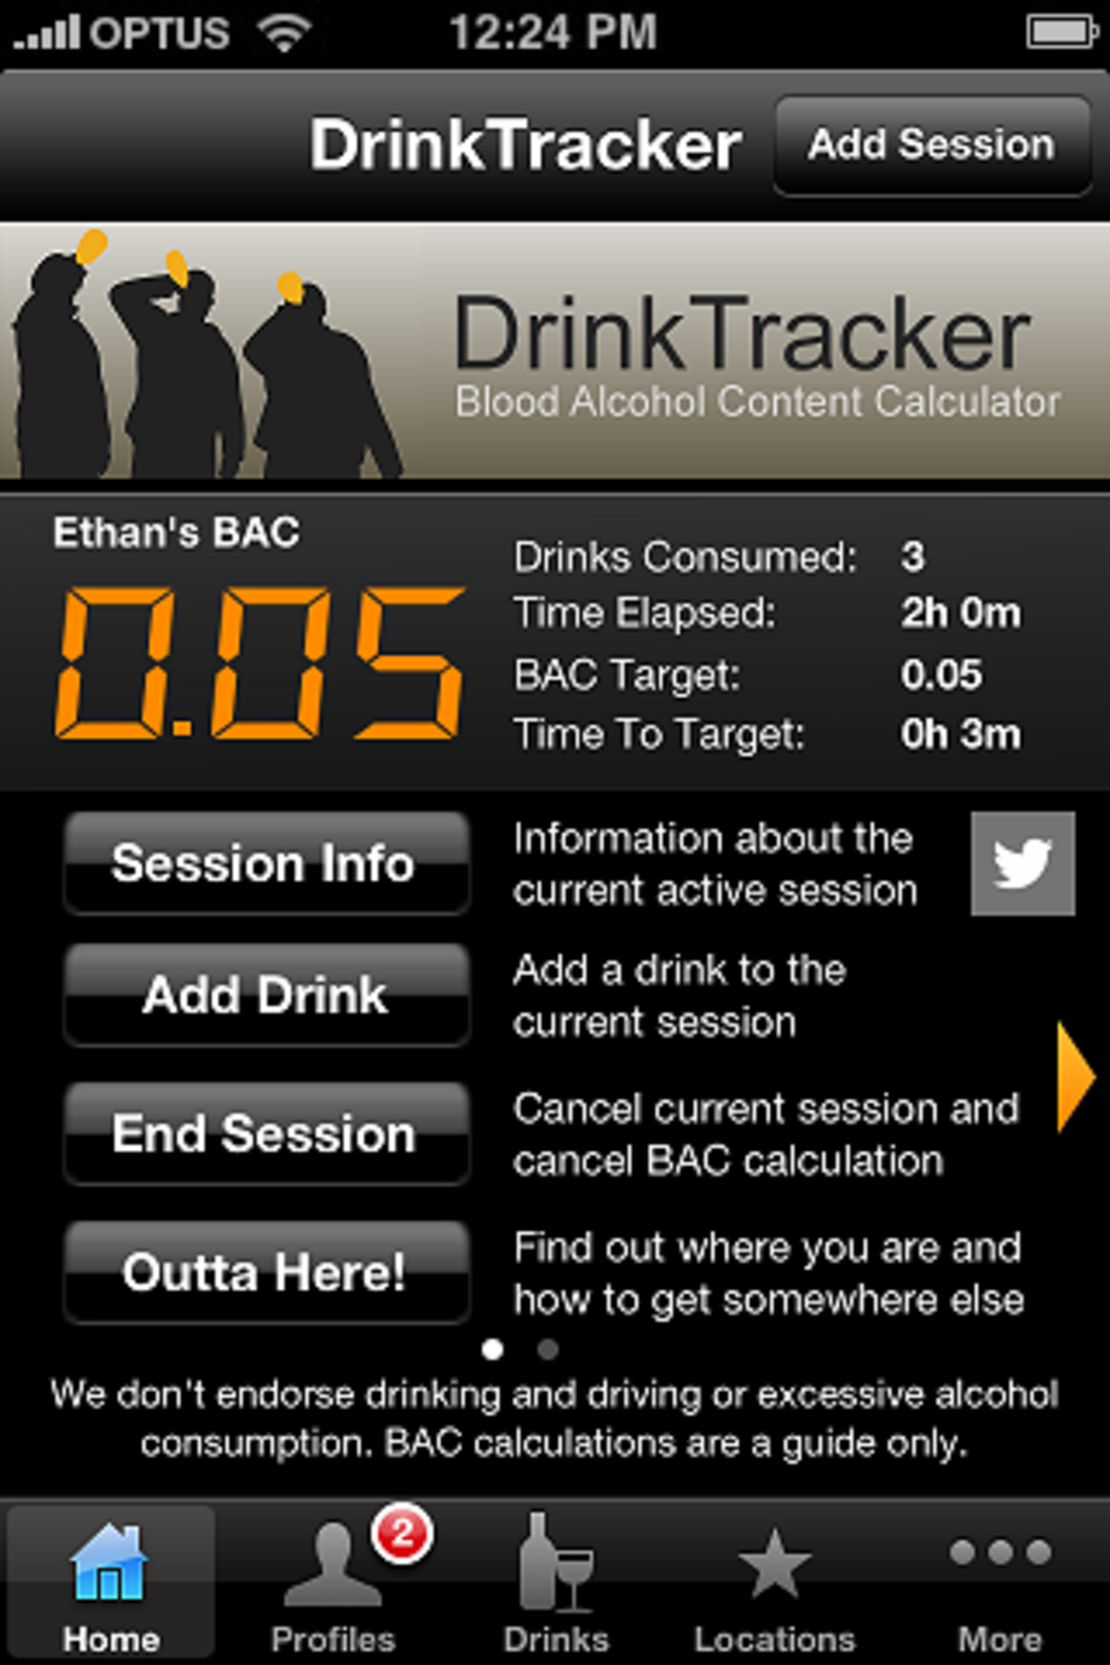 The DrinkTracker app will estimate your blood-alcohol level based on several factors.